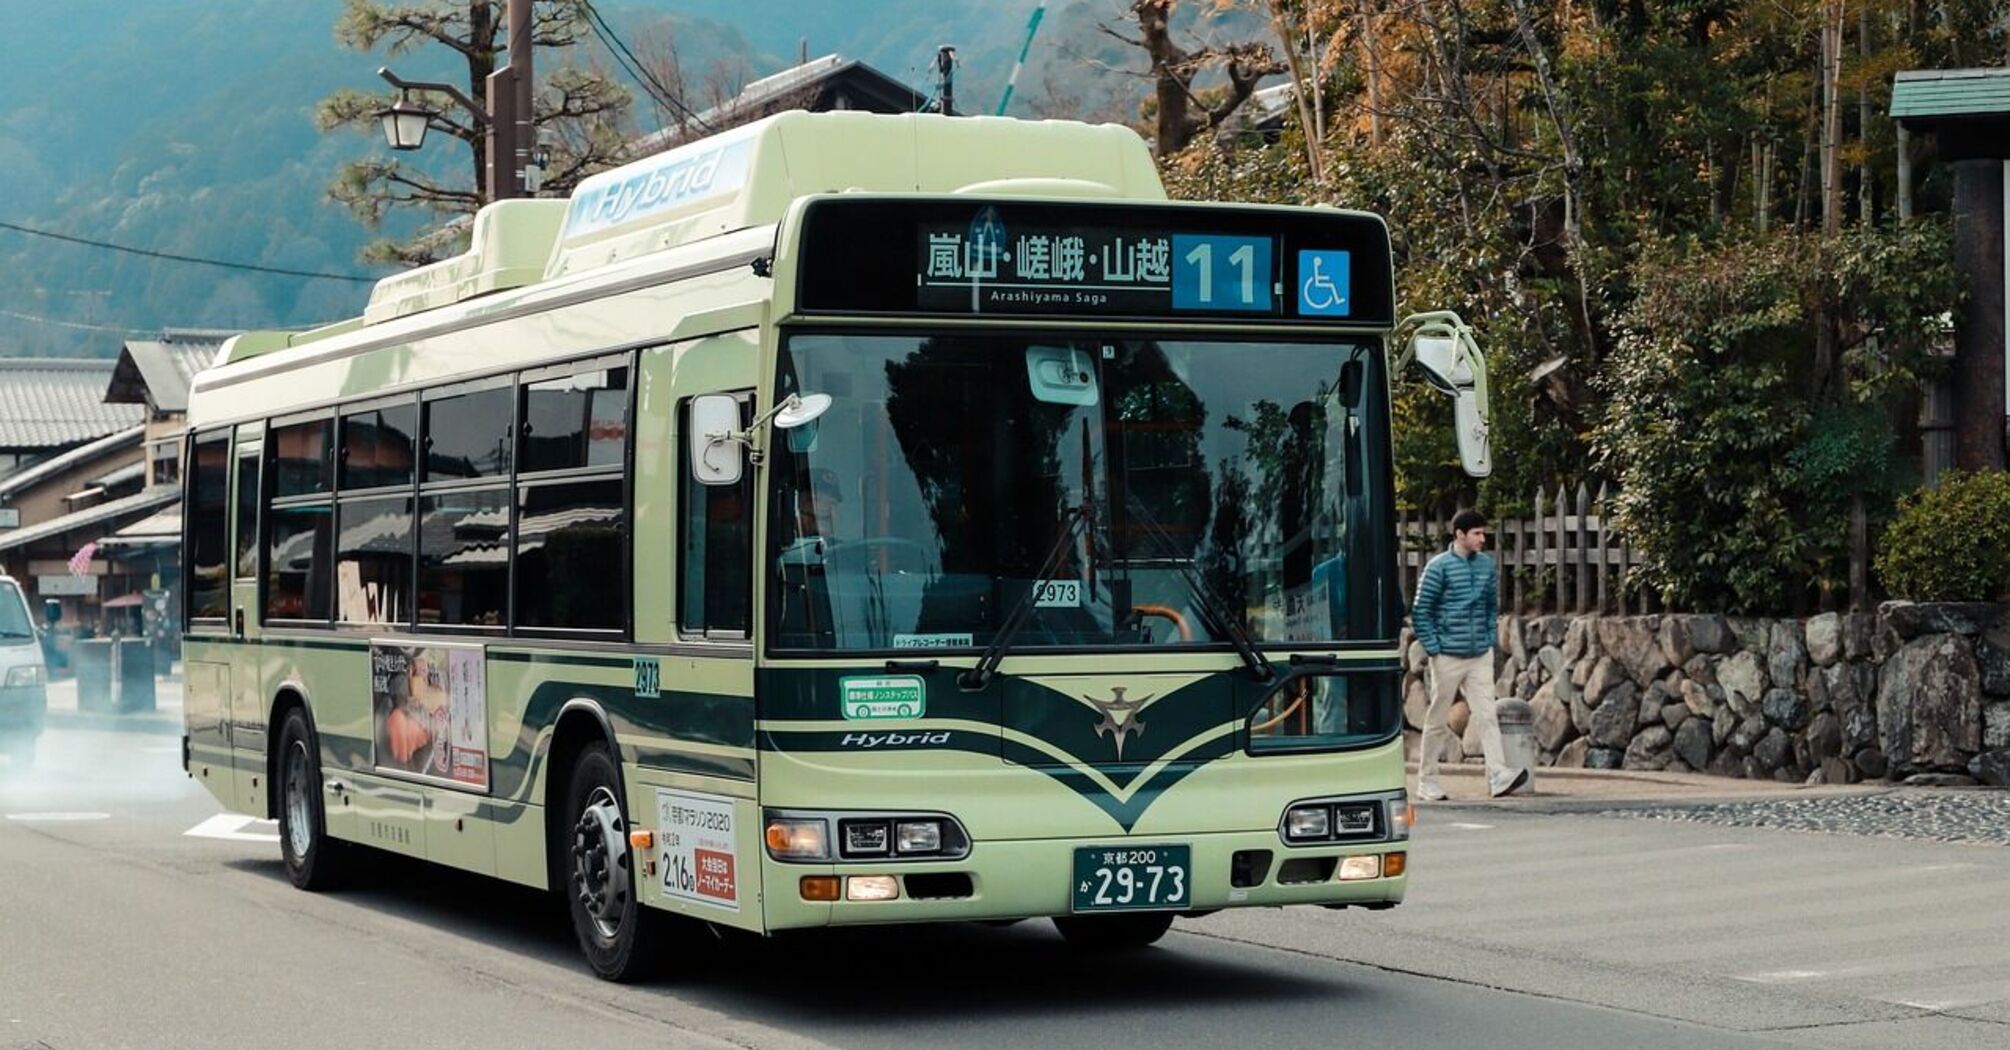 Be careful when taking a bus in Japan: You may be stuck at highway stops if you are late